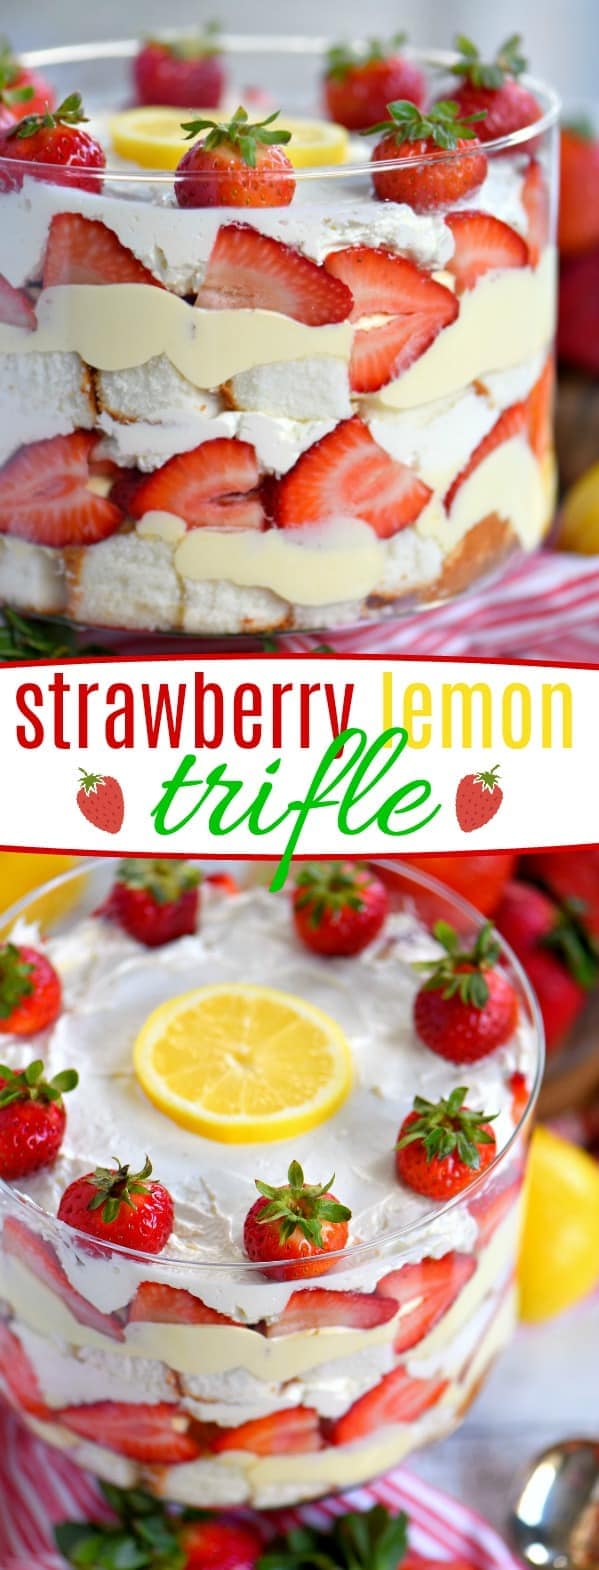 This Lemon Strawberry Trifle is what dreams are made of! An easy, no bake trifle recipe that is loaded with fresh strawberries, angel food cake, and lemon pudding - sure to be the highlight of your party! Perfect for easy entertaining during spring and summer! // Mom On Timeout #strawberry #lemon #trifle #dessert #easy #summer #entertaining #spring #desserts #ad